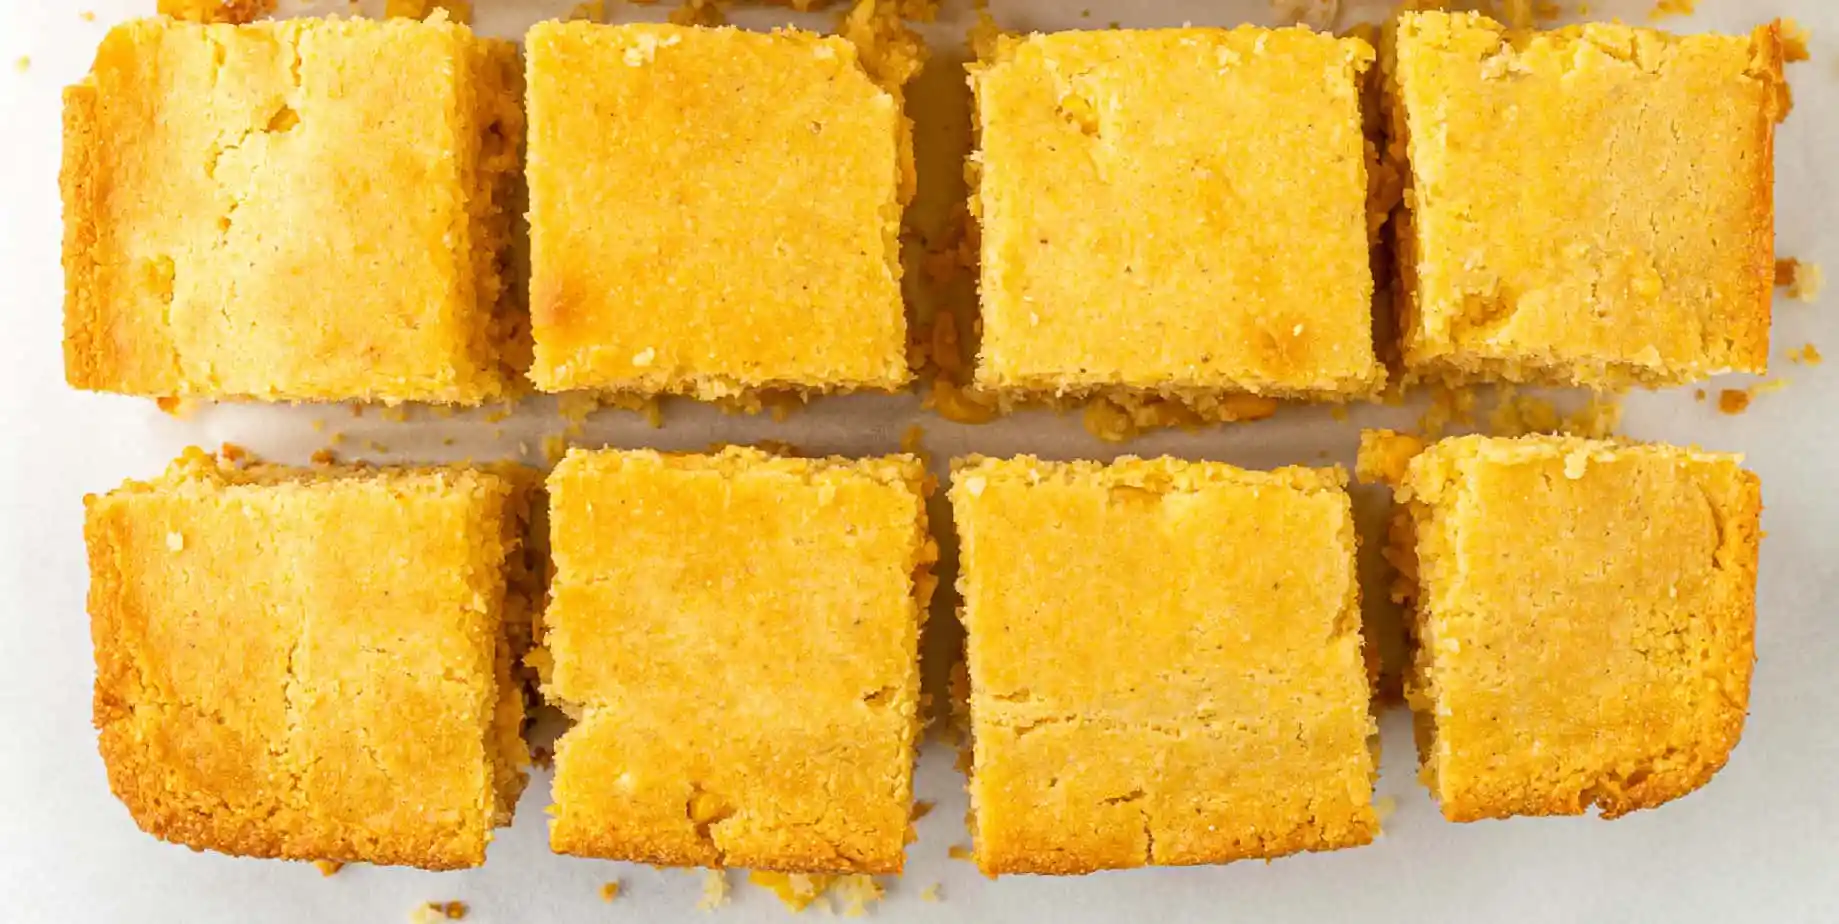 8 perfect squares of bright yellow cornbread in two rows.